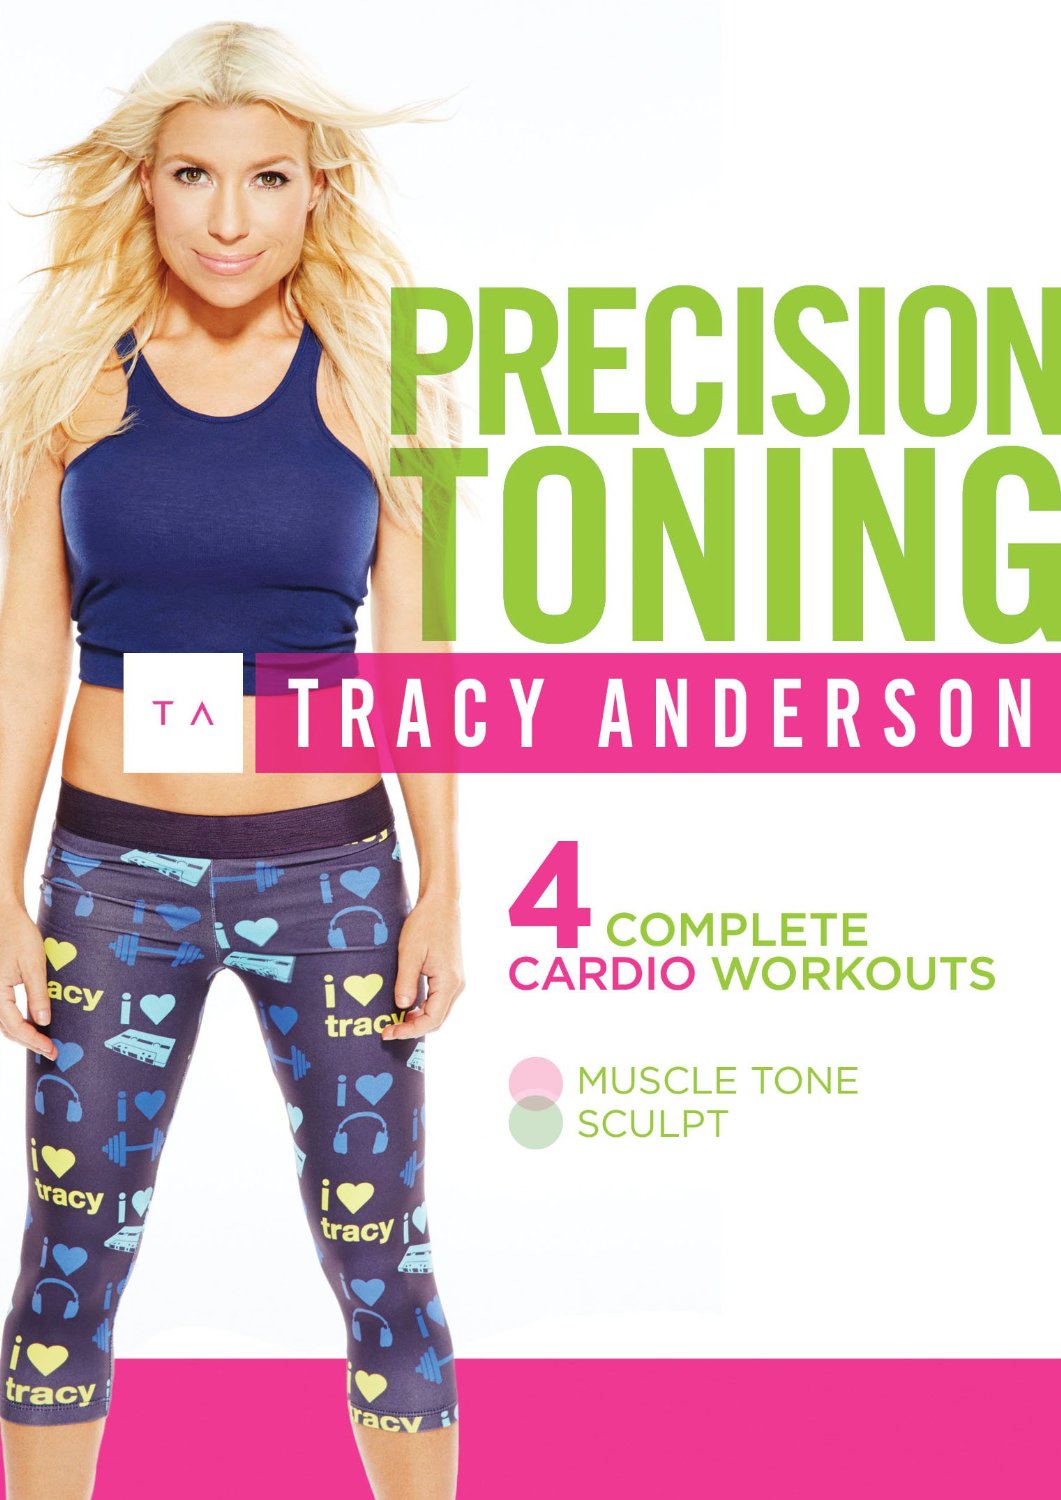  8 Minute Arm Workout Tracy Anderson for Build Muscle